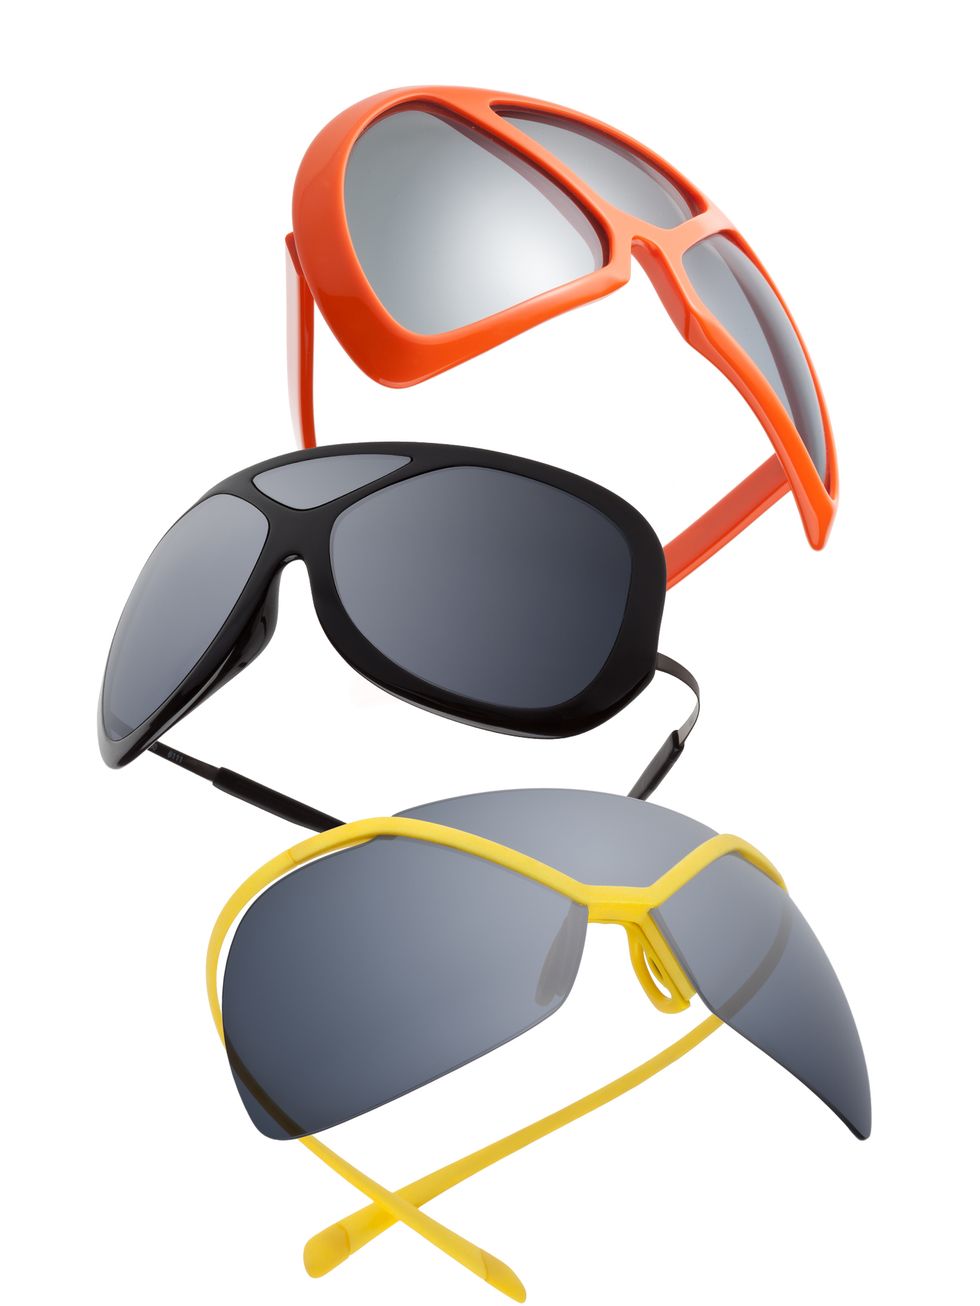 Eyewear, Glasses, Vision care, Goggles, Product, Brown, Yellow, Personal protective equipment, Sunglasses, Orange, 